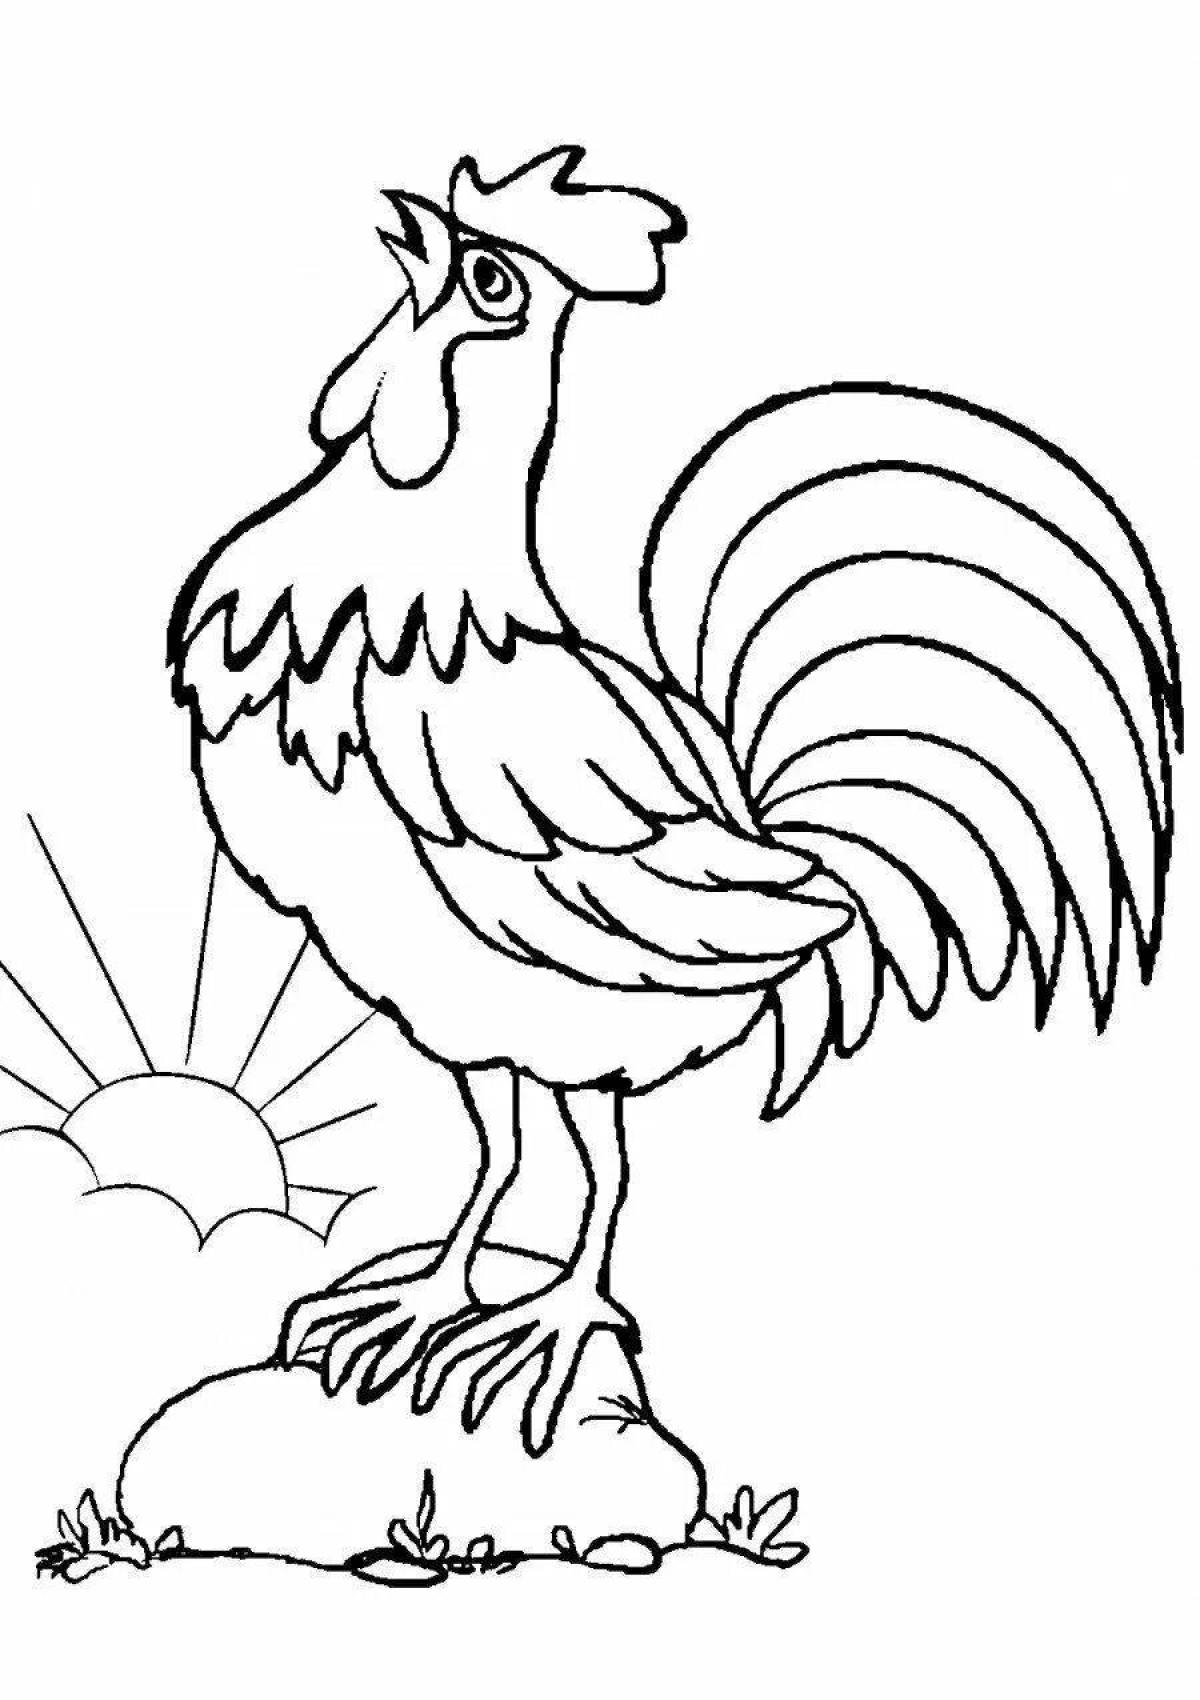 Colouring shining rooster for kids